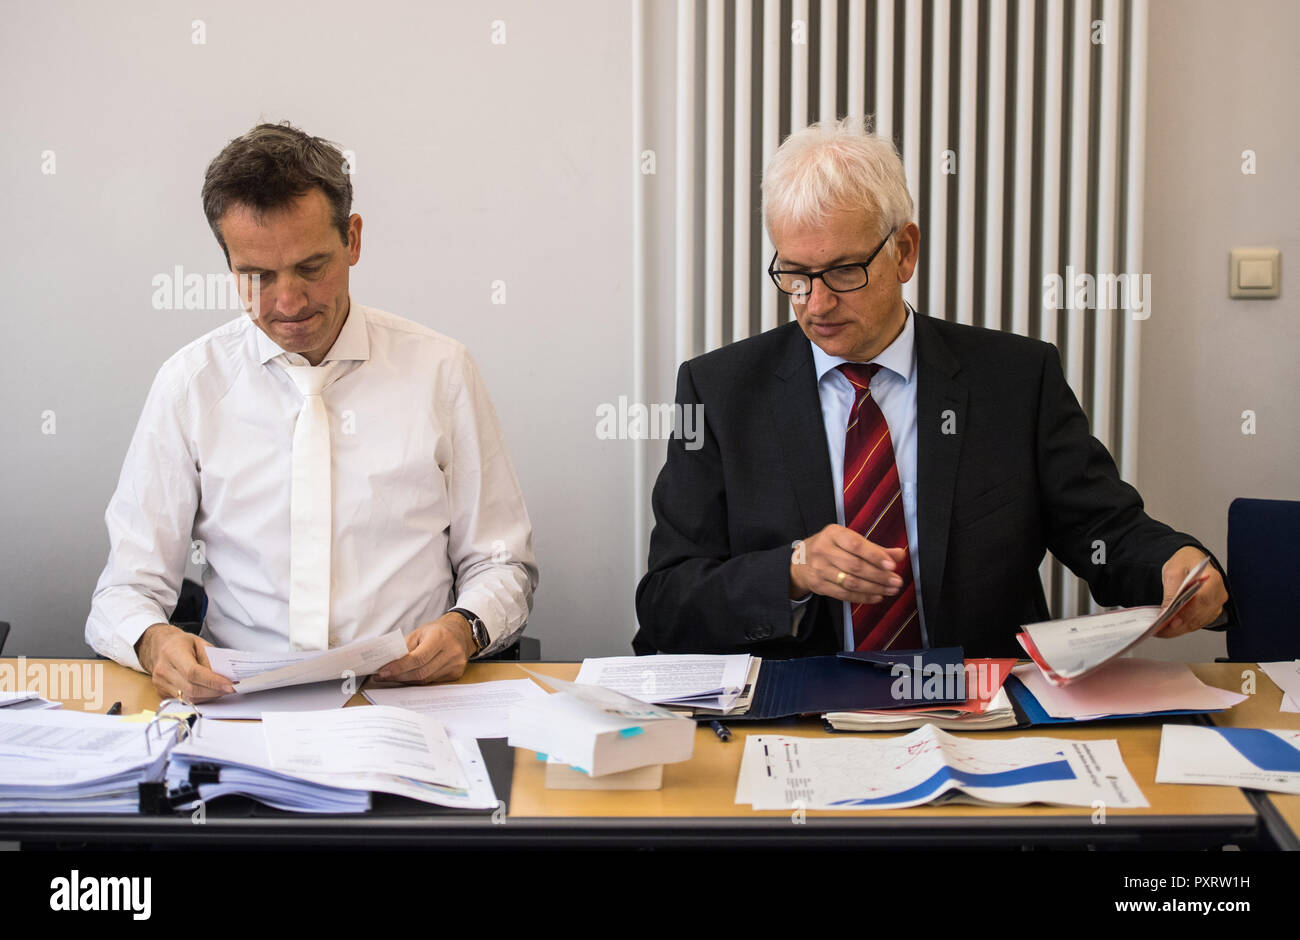 24 October 2018, Rhineland-Palatinate, Mainz: Remo Klinger (l), specialist lawyer for administrative law, sits in the courtroom on behalf of Deutsche Umwelthilfe (DUH) with Jürgen Resch, Managing Director of Deutsche Umwelthilfe, before the start of negotiations. The Administrative Court is negotiating a possible ban on diesel driving in the state capital of Rhineland-Palatinate. The case concerns a complaint by Deutsche Umwelthilfe (DUH) against the city of Mainz concerning exceeded limit values for nitrogen dioxide (NO2) in the air. Photo: Andreas Arnold/dpa Stock Photo